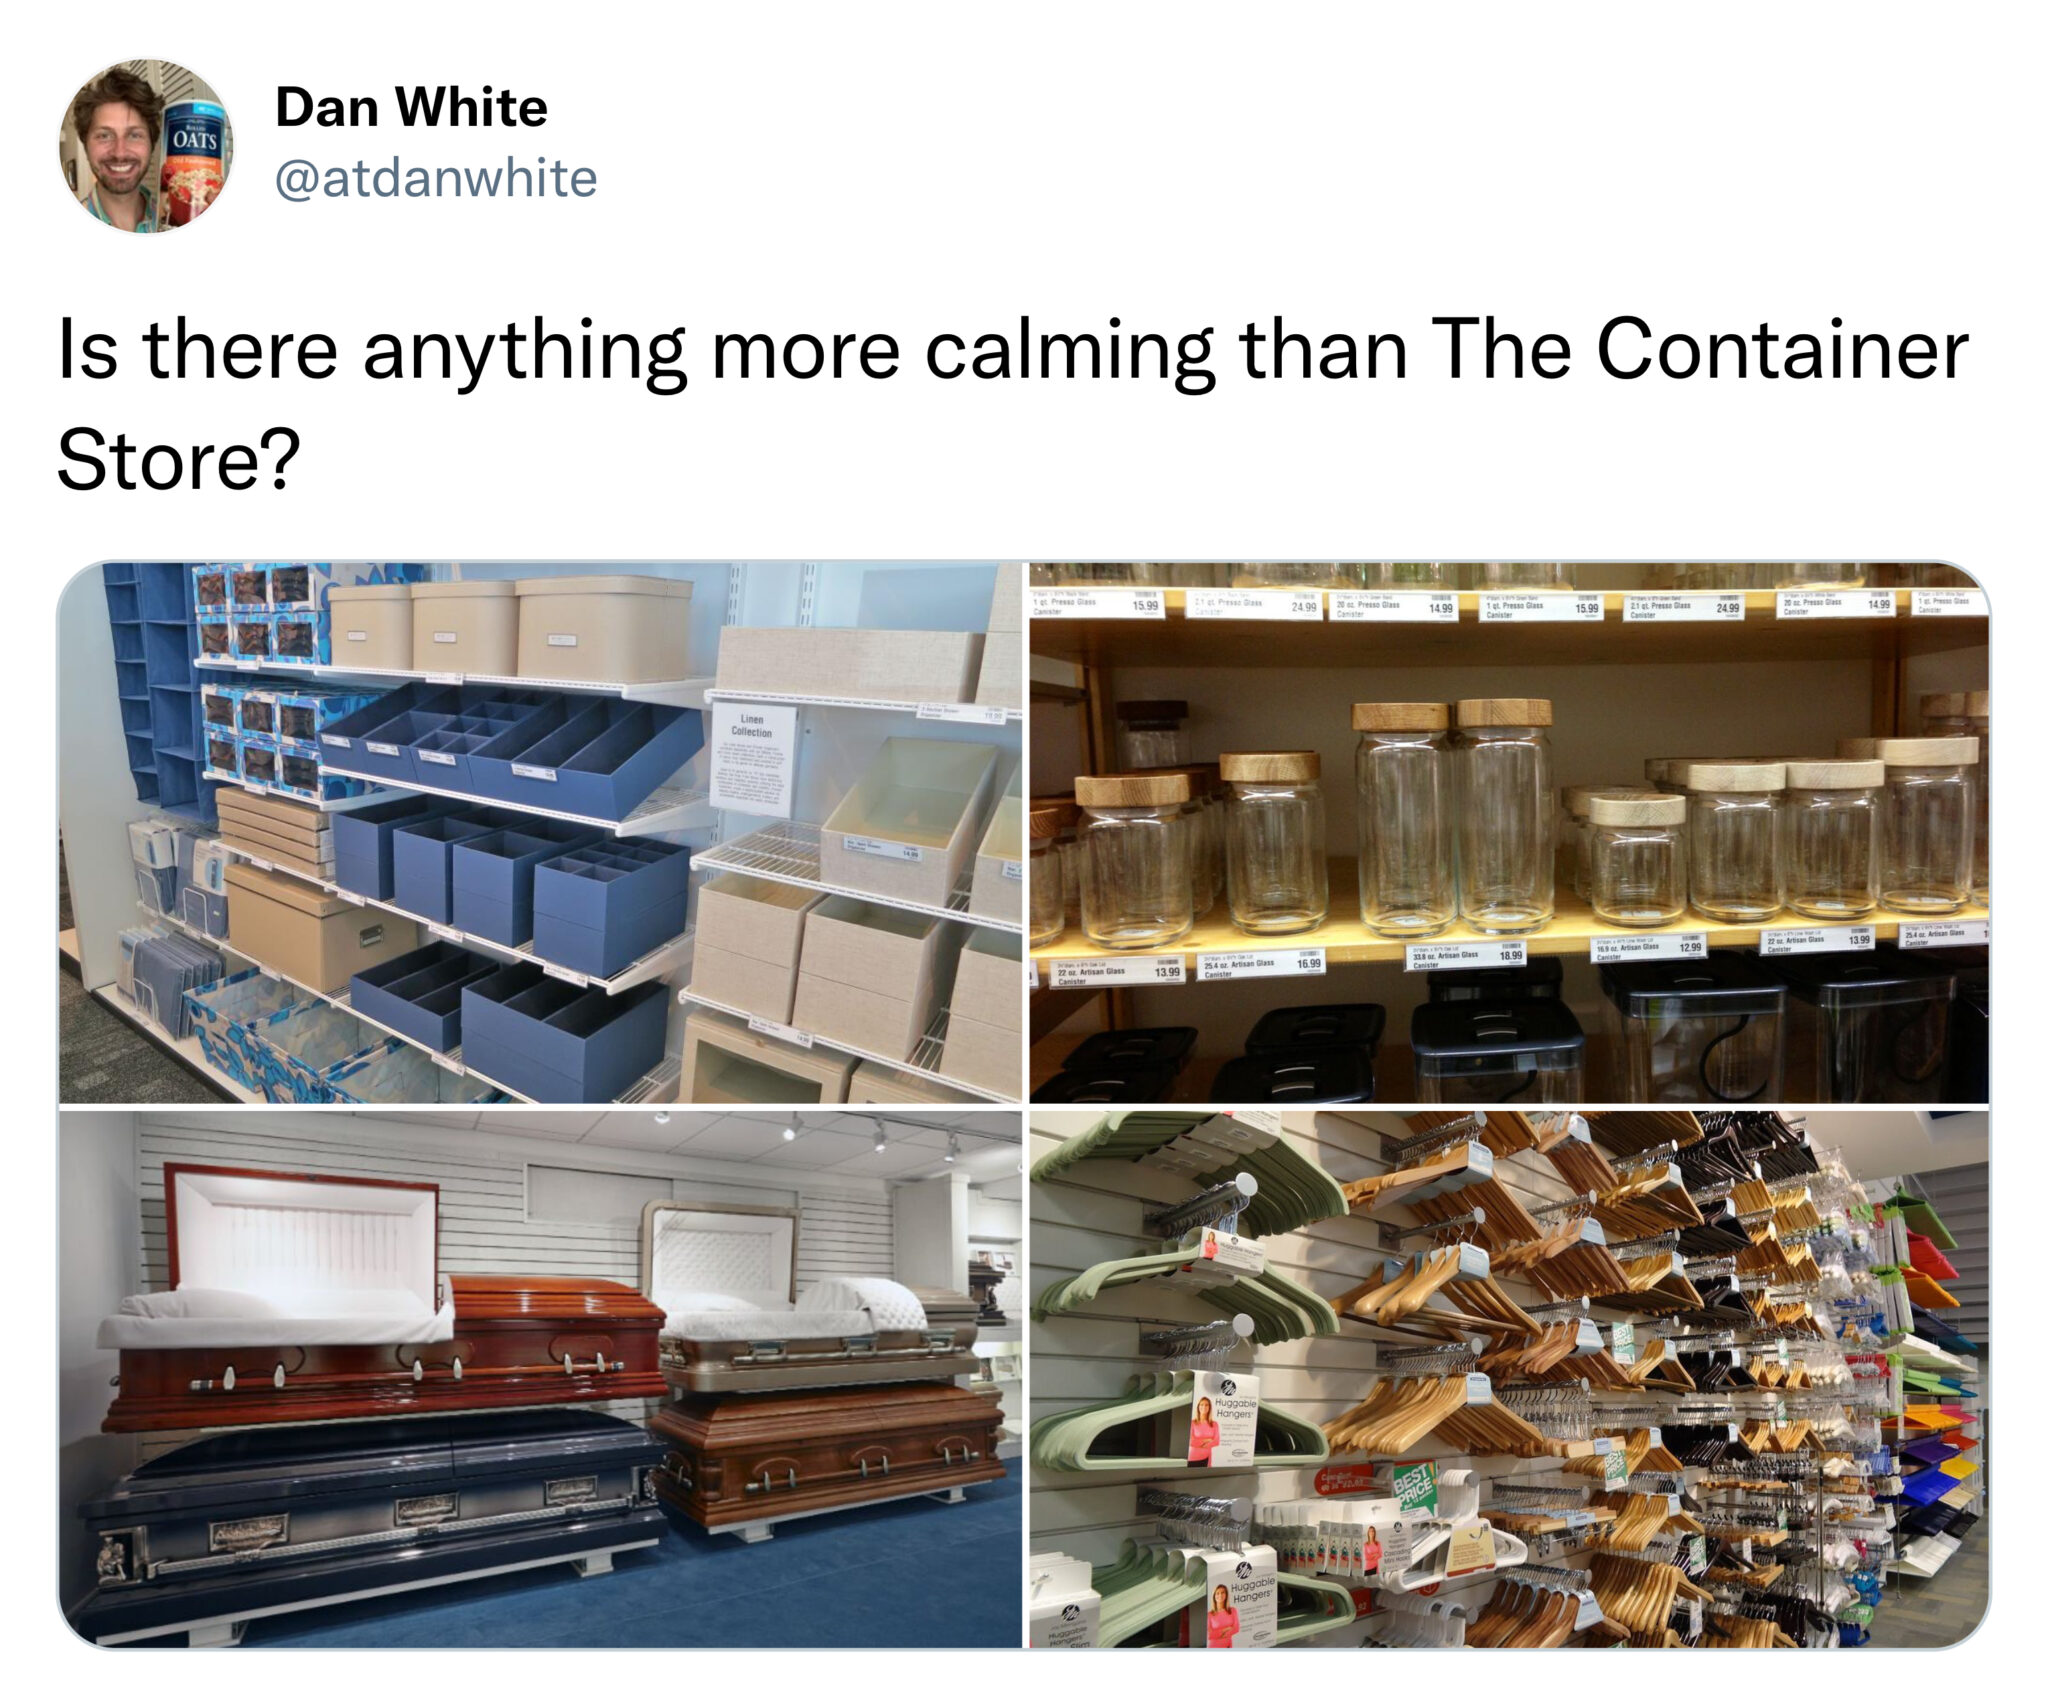 funniest tweets of the week - inventory - Dan White Is there anything more calming than The Container Store?